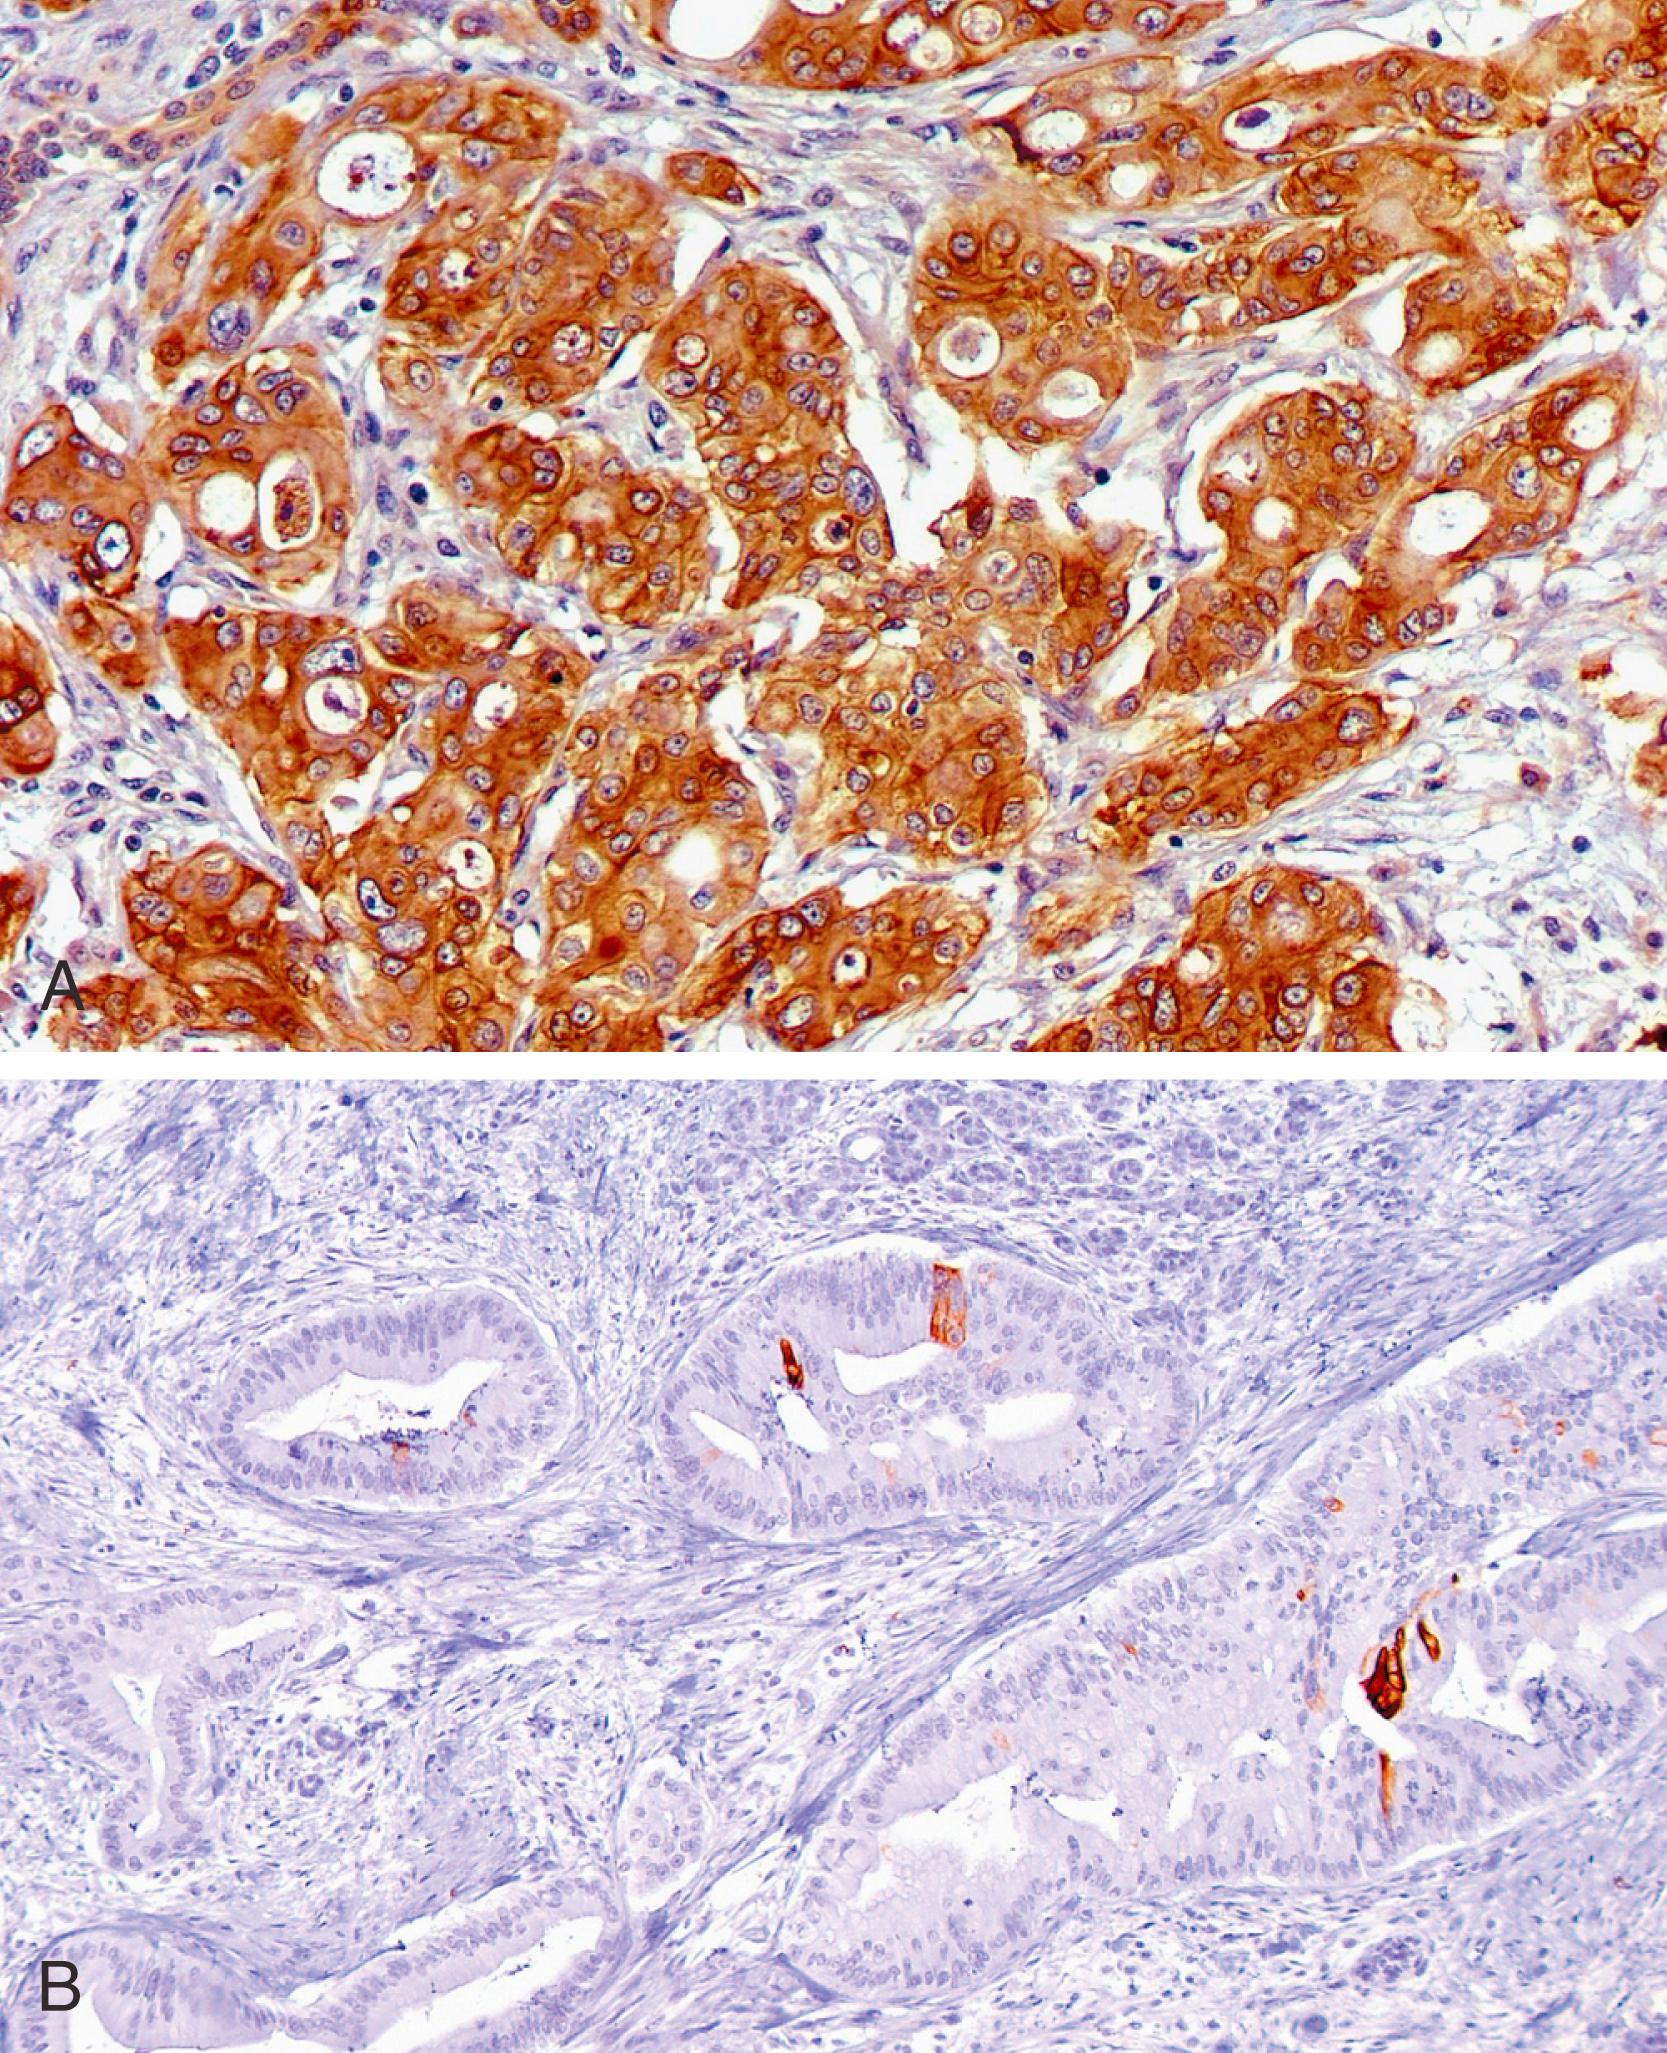 Fig. 15.4, CK7 is expressed diffusely and strongly in the vast majority of ductal adenocarcinoma cases (A); however, CK20 expression is less common and is usually focal (B).